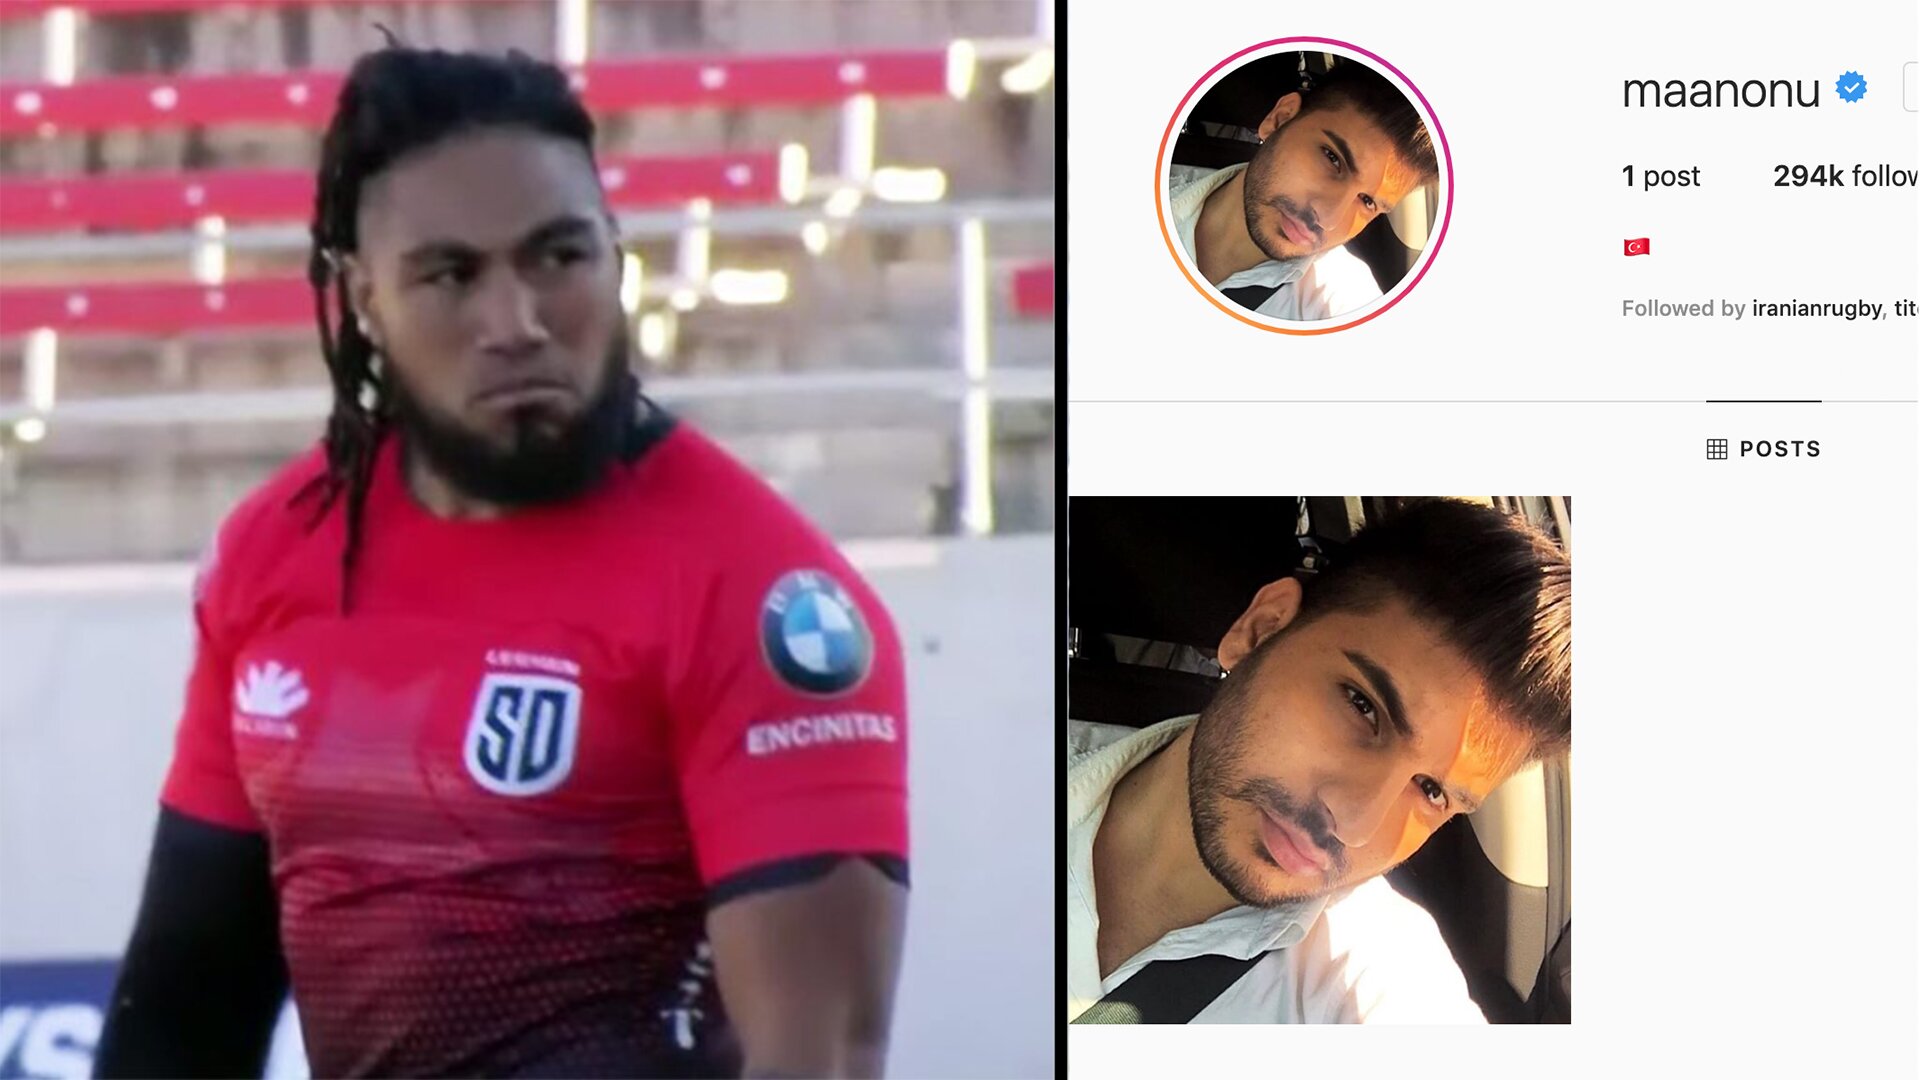 People online are confused as Ma'a Nonu is hacked on social media